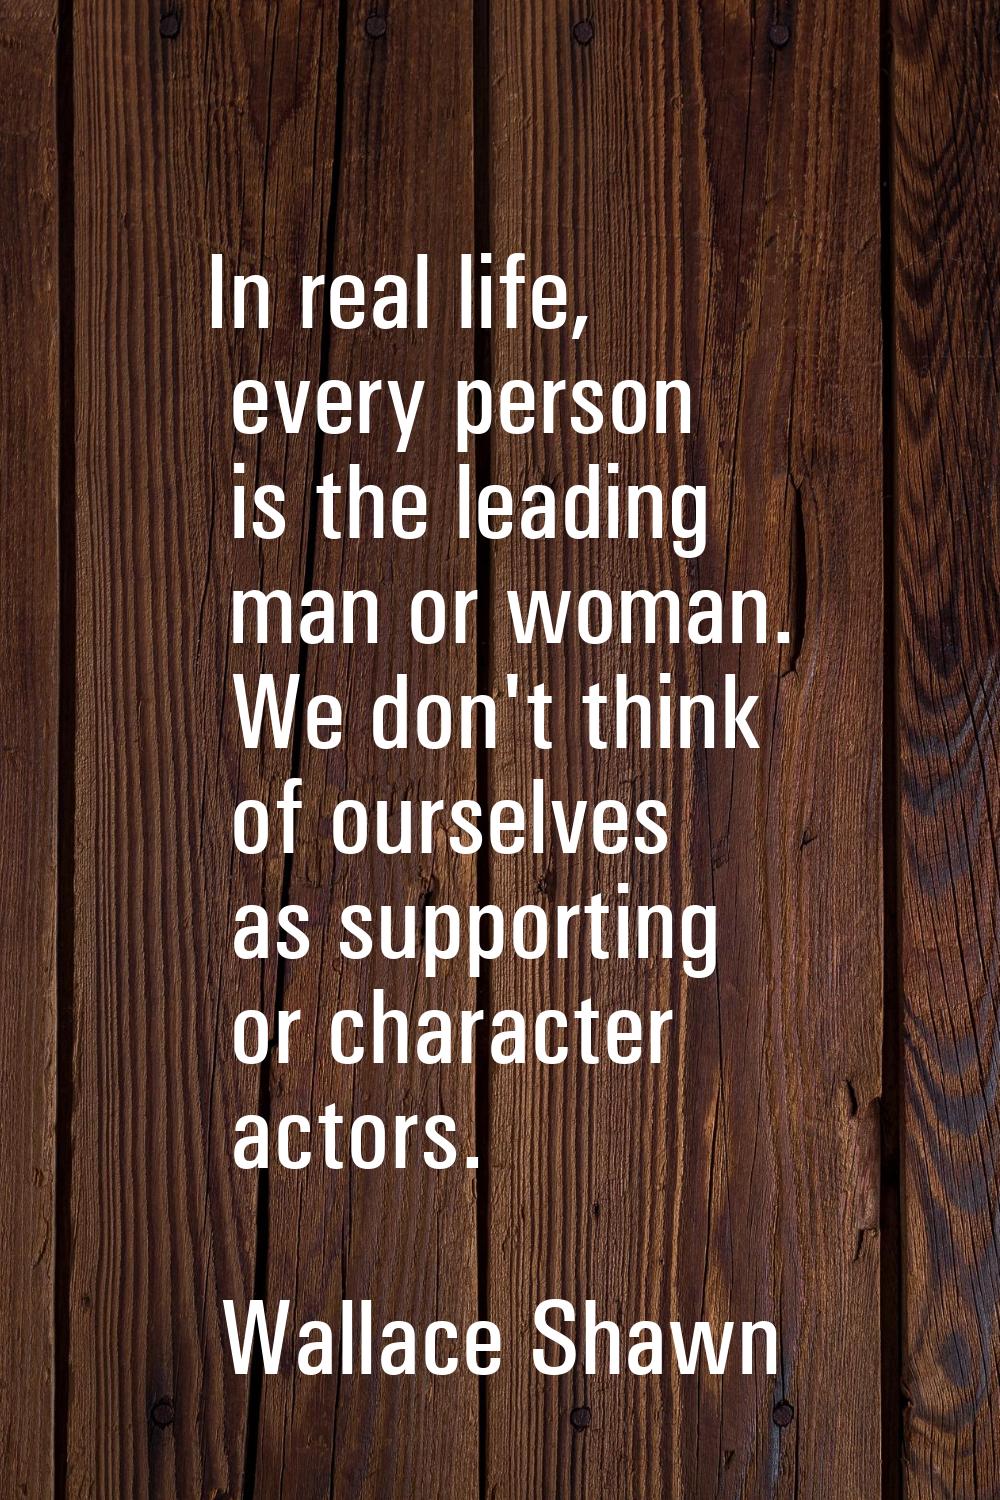 In real life, every person is the leading man or woman. We don't think of ourselves as supporting o